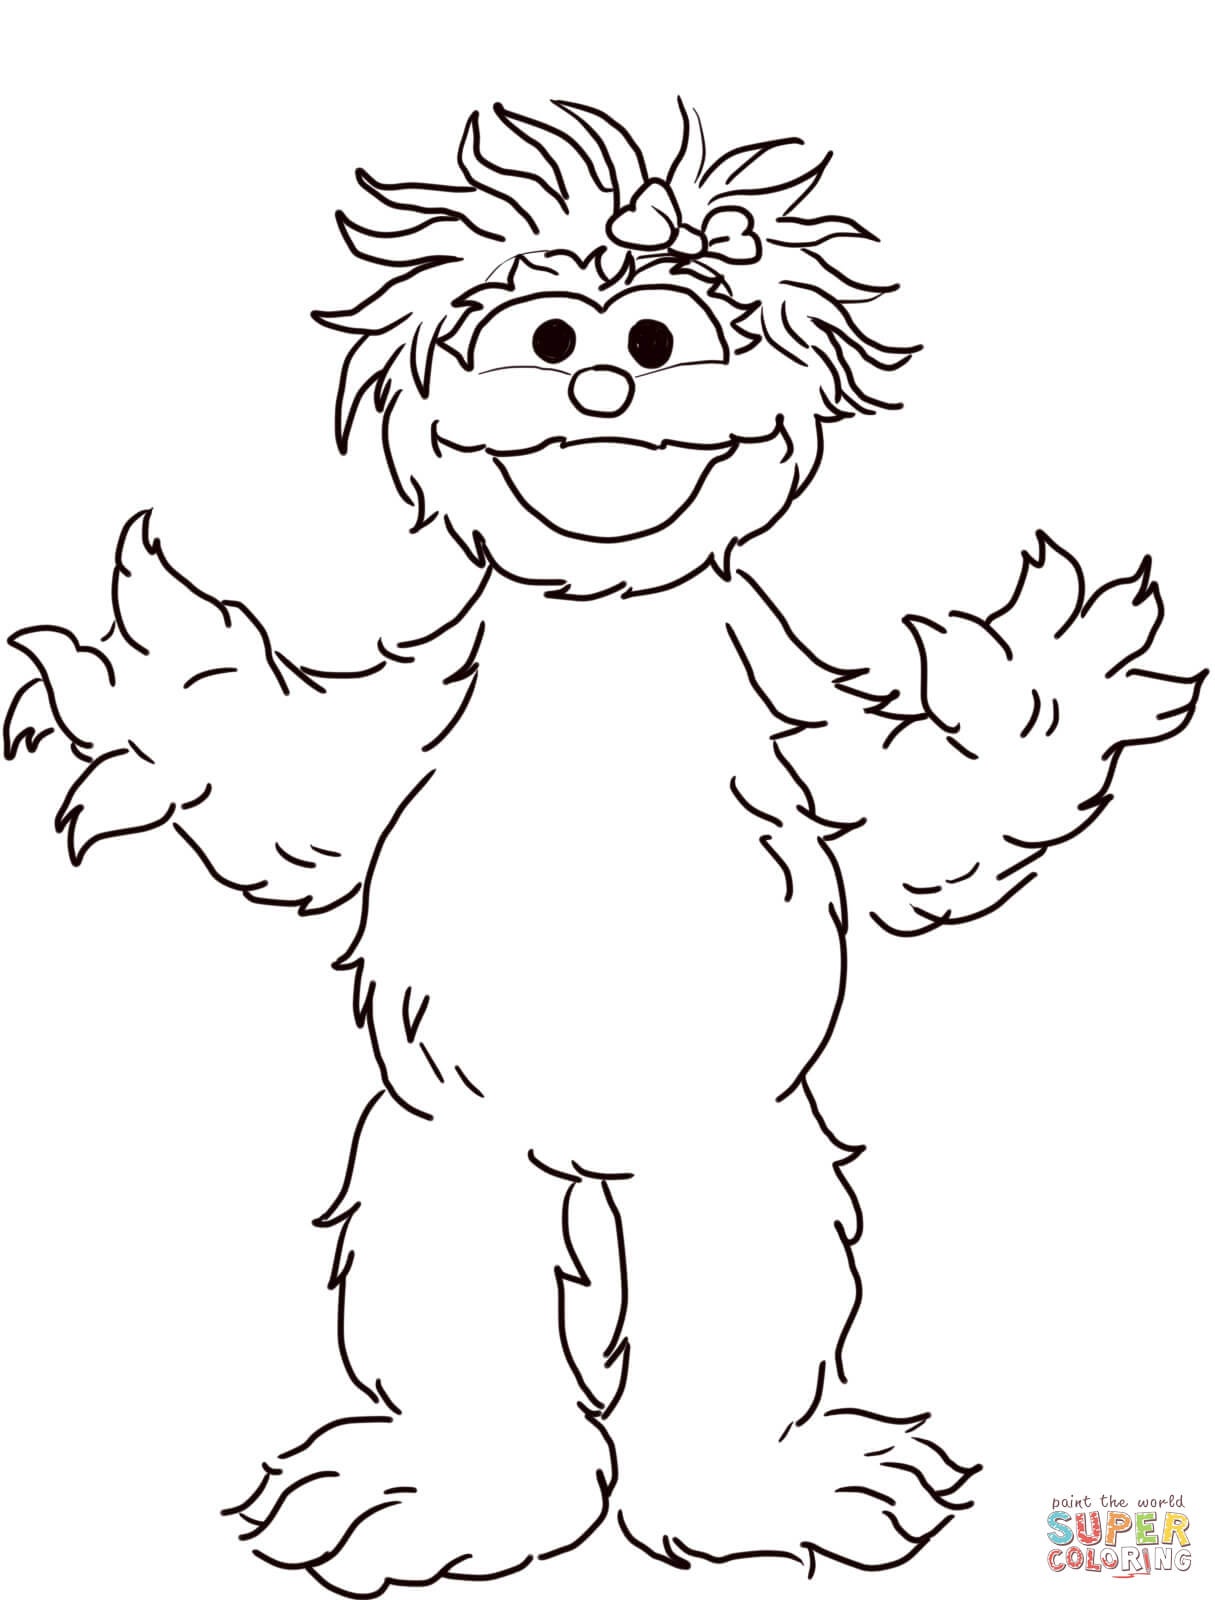 Sesame Street Coloring Pages | Free Coloring Pages - Free Printable Sesame Street Coloring Pages